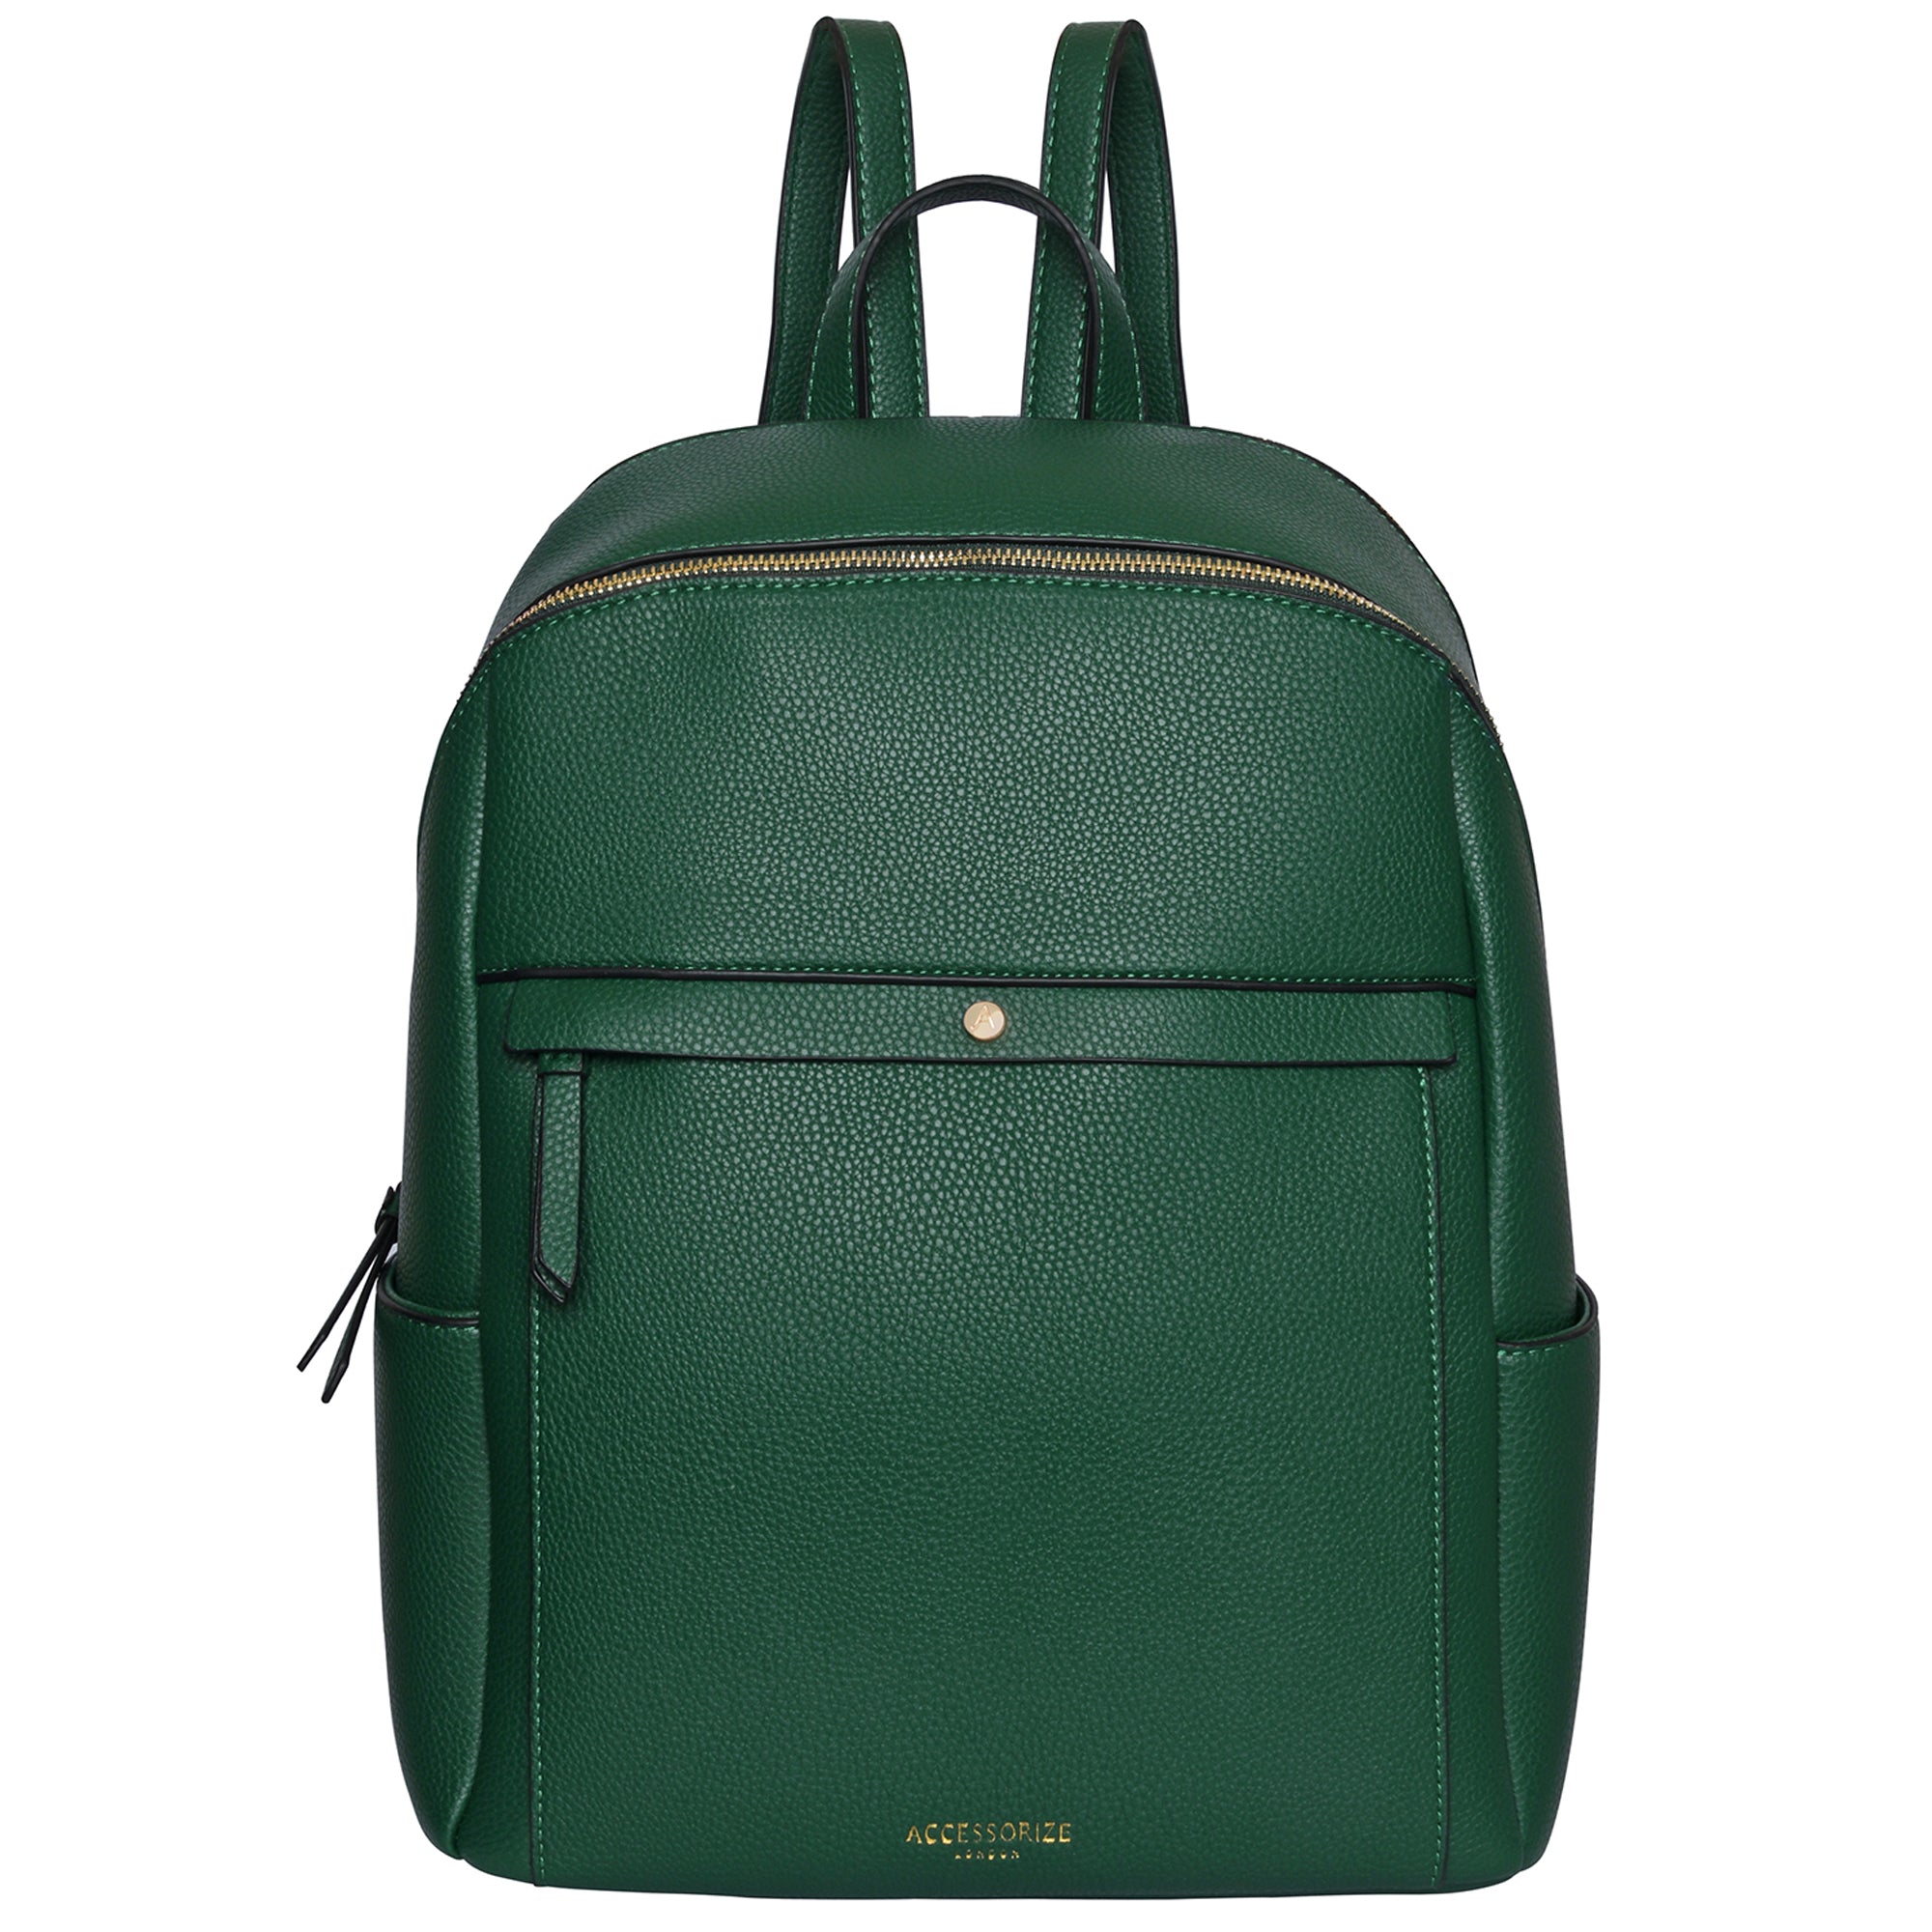 Buy Leather Backpack Men / Women Leather Rucksack Laptop Online in India 